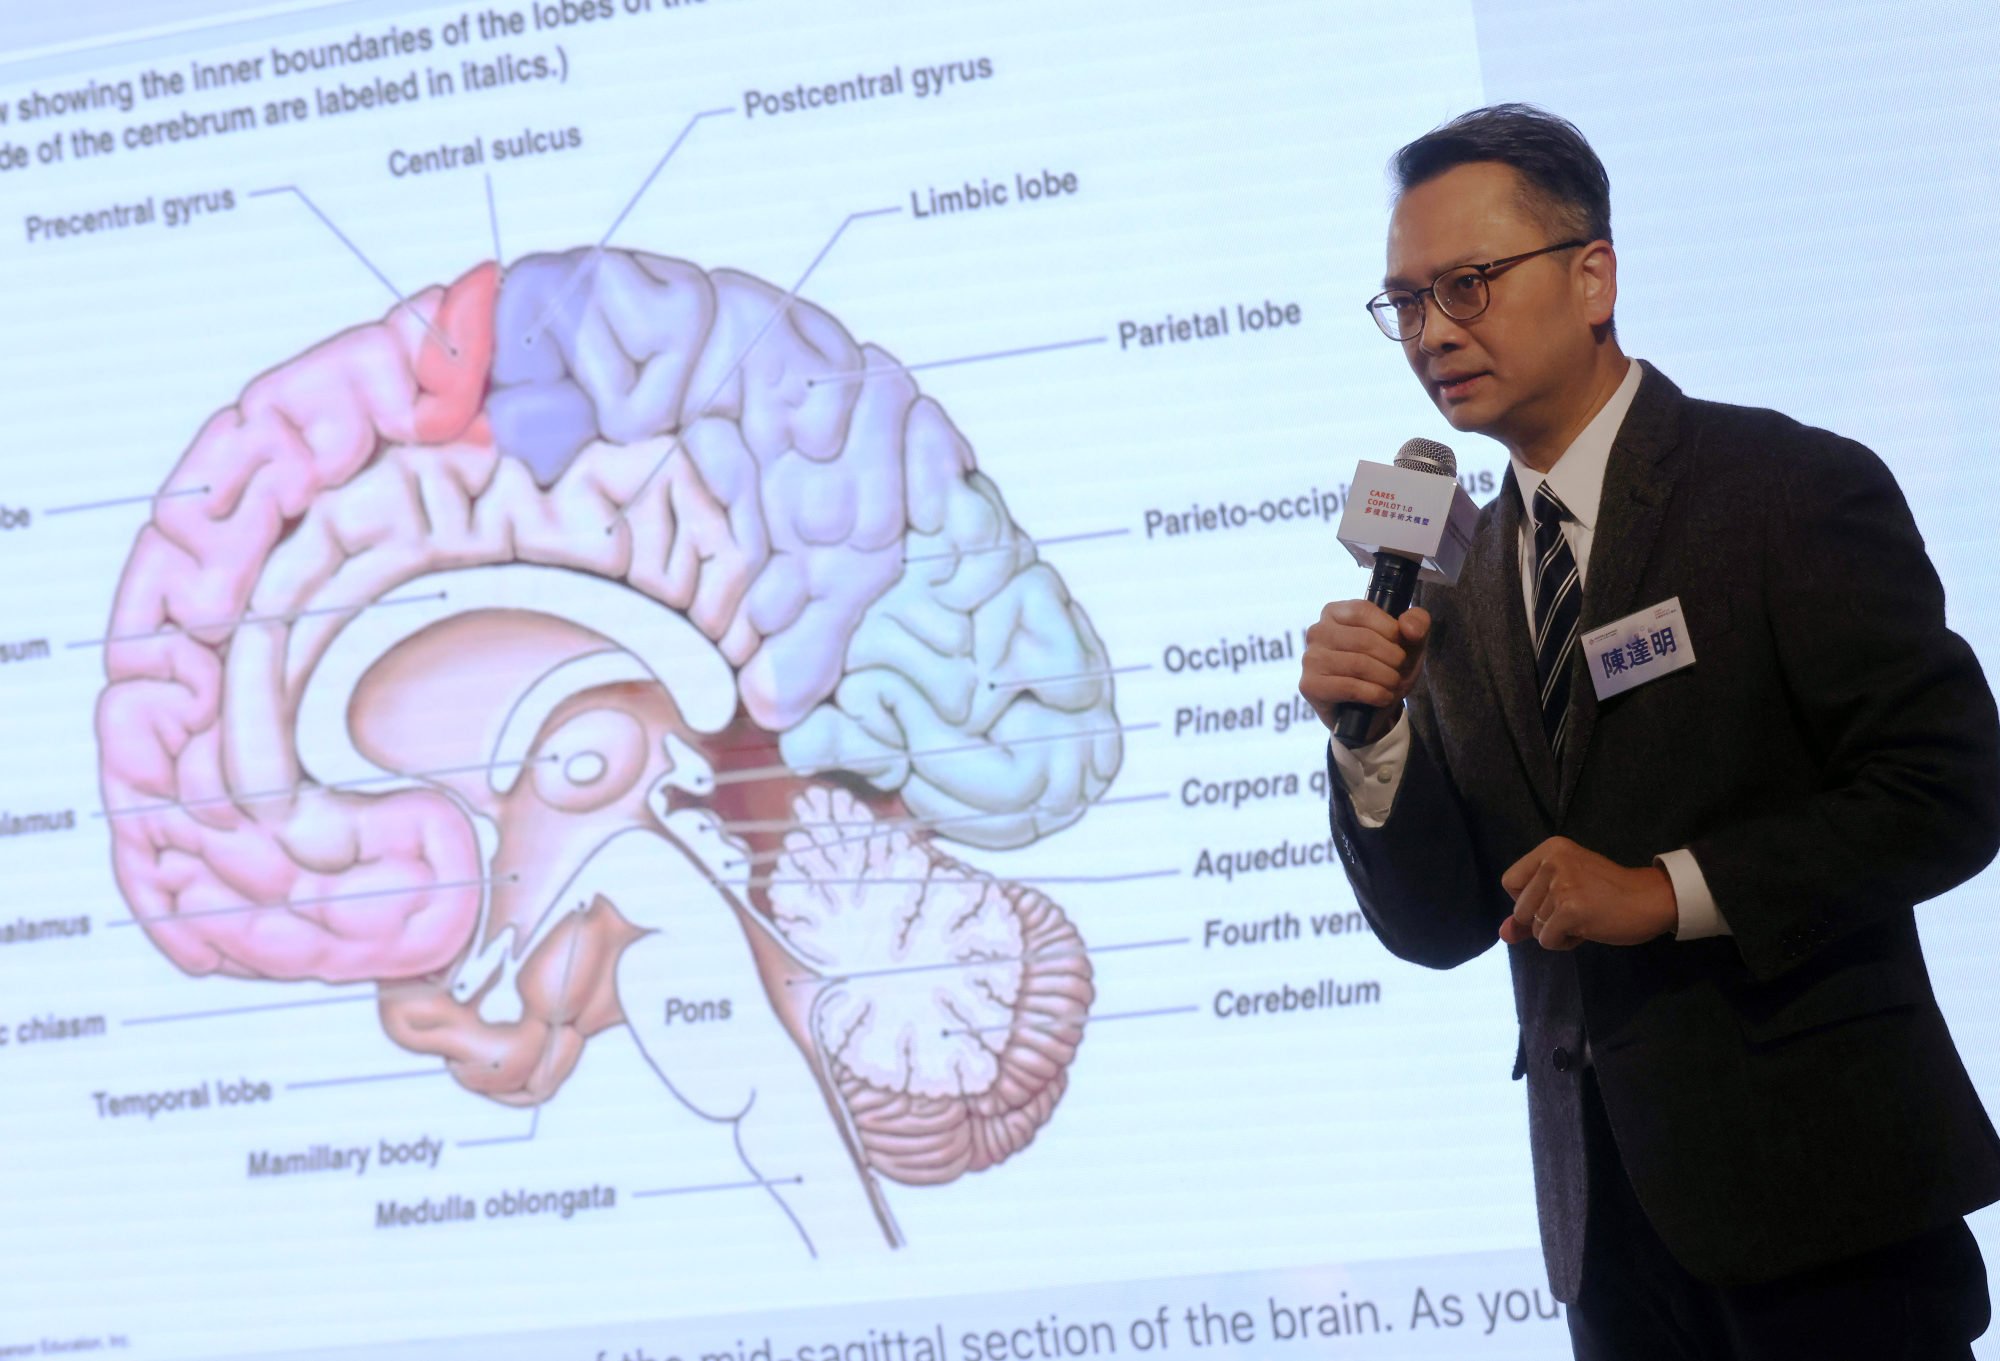 Danny Chan Tat-ming, head of the neurosurgery division at the Department of Surgery in the Chinese University of Hong Kong, shows the capabilities of the CARES Copilot 1.0 artificial intelligence model at a press conference held in the Hong Kong Science Park on Monday. Photo: Jonathan Wong